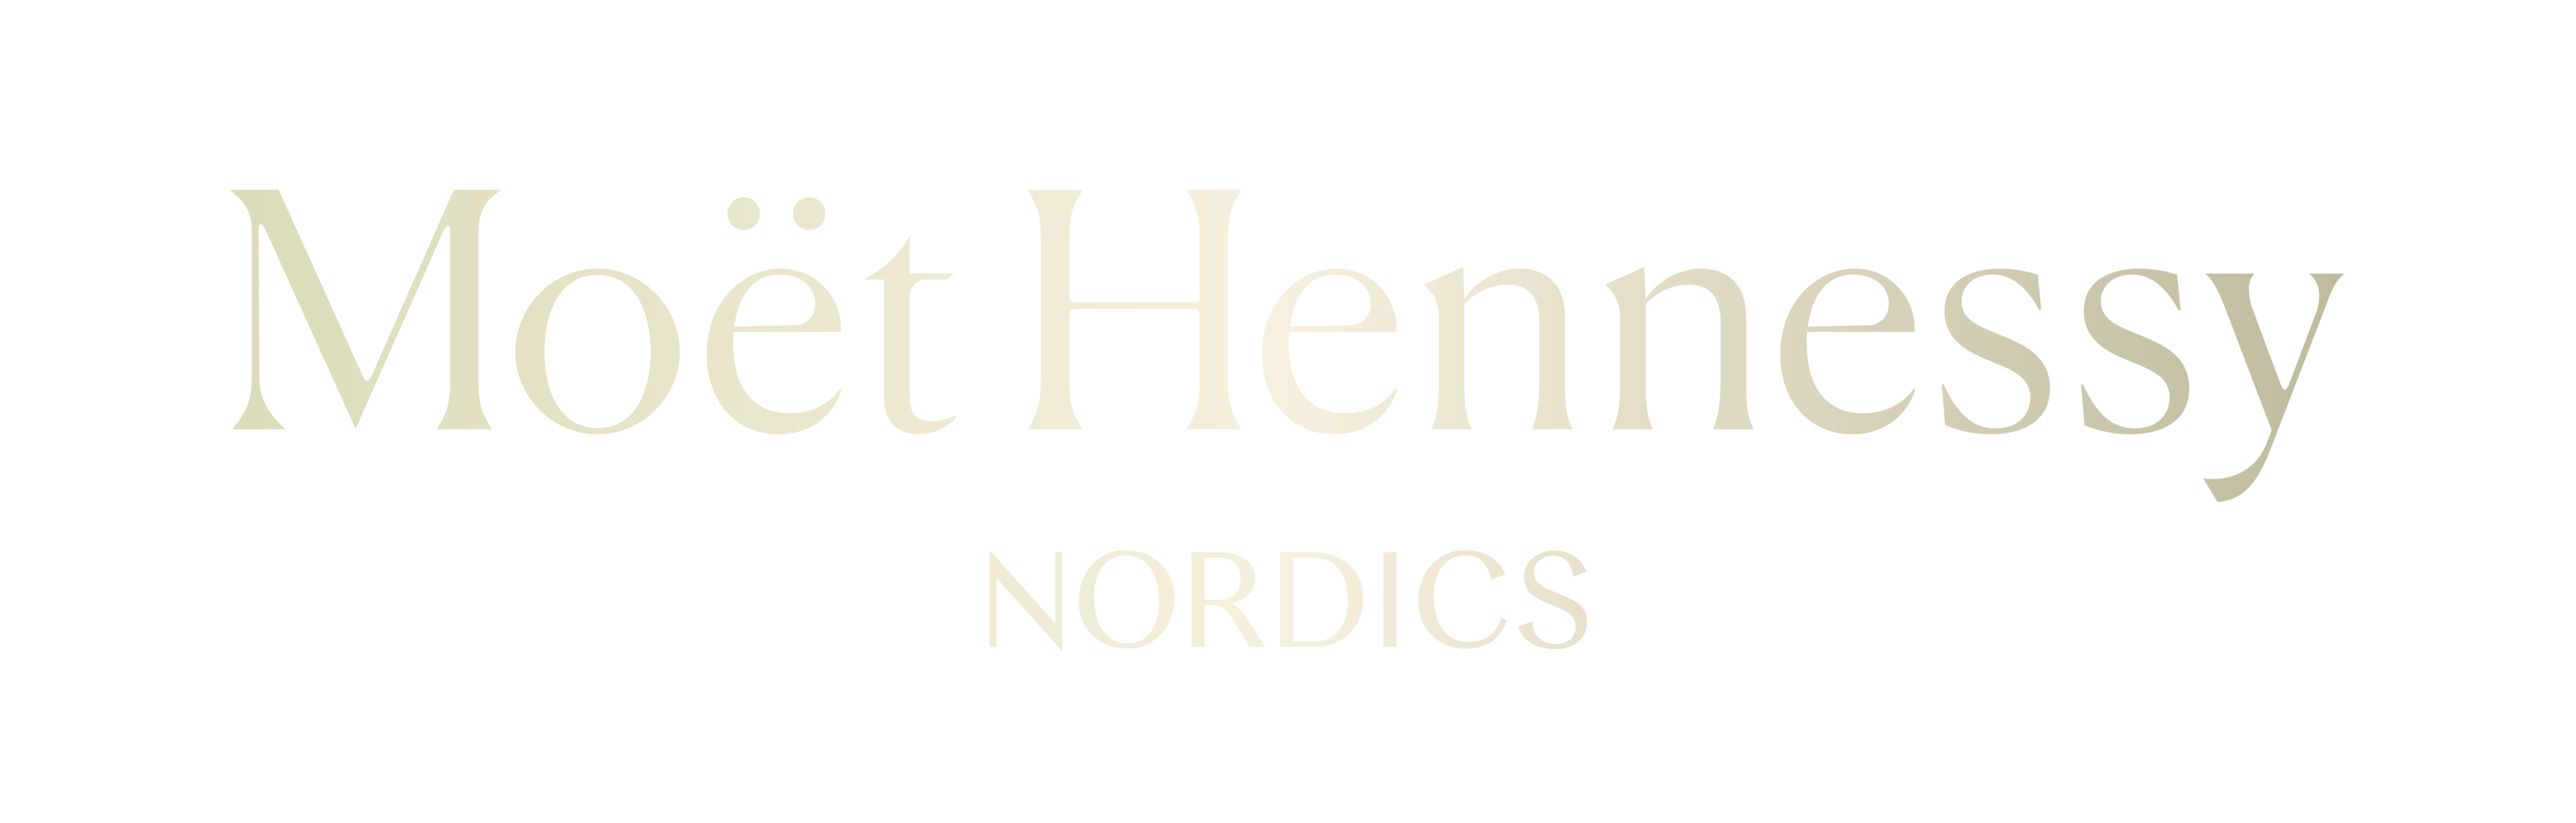 Moët Hennessy - Nordic site | Moët Hennessy is part of the LVMH group.